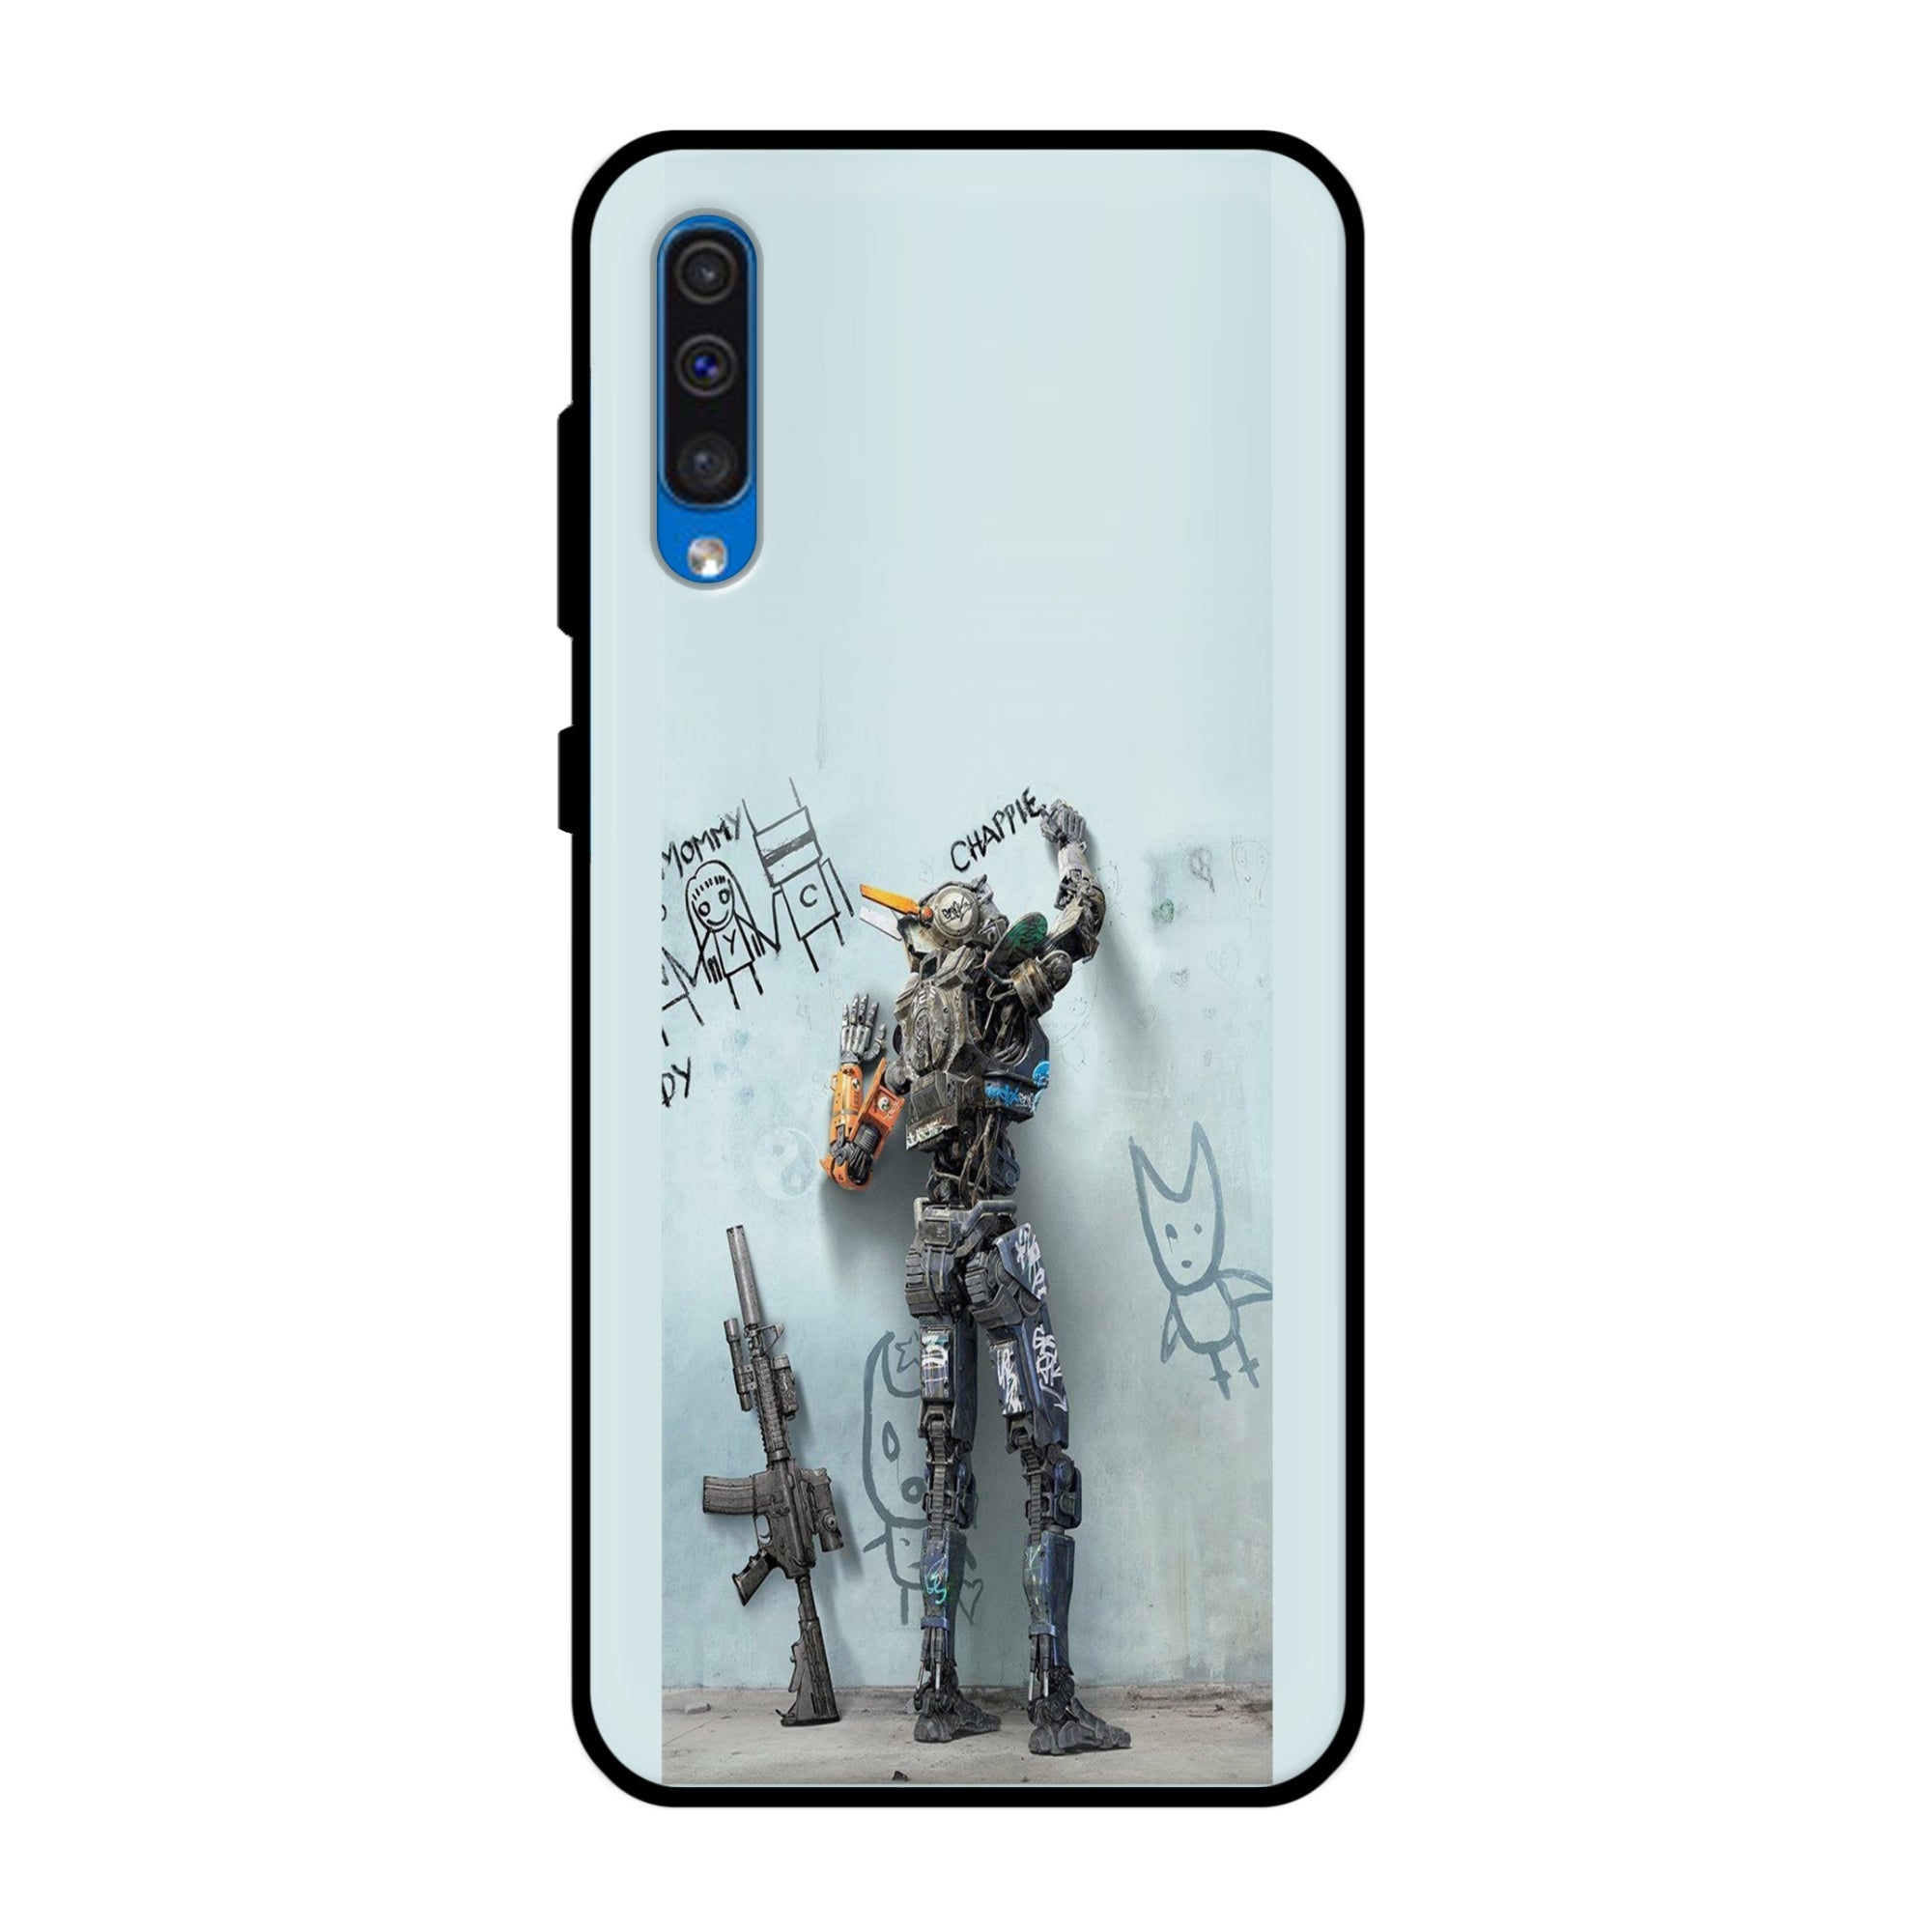 Buy Chappie Metal-Silicon Back Mobile Phone Case/Cover For Samsung Galaxy A50 / A50s / A30s Online